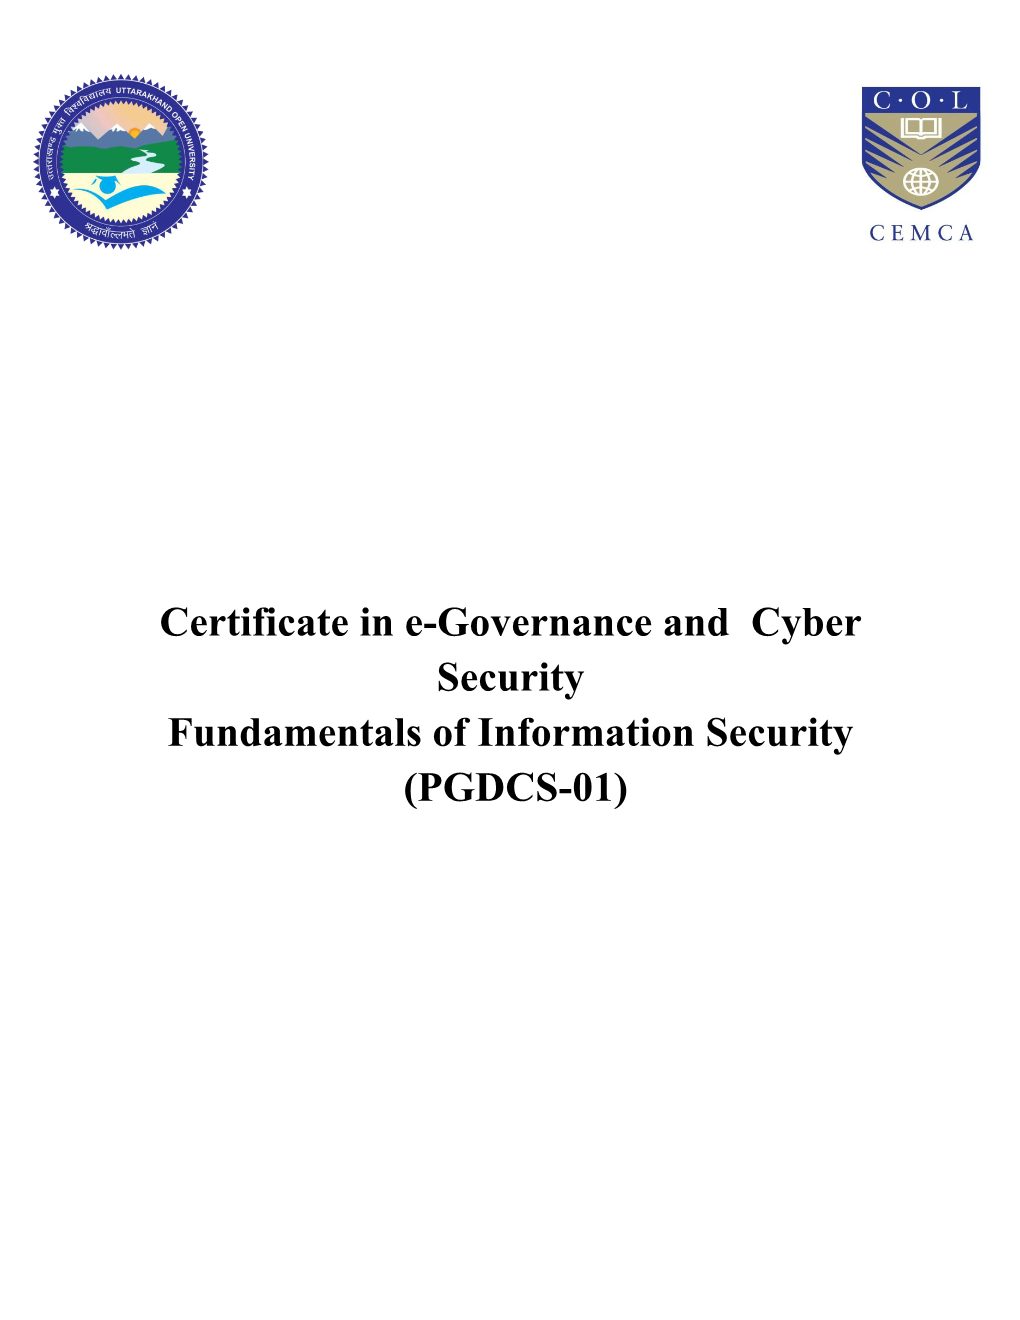 Certificate in E-Governance and Cyber Security Fundamentals of Information Security (PGDCS-01)